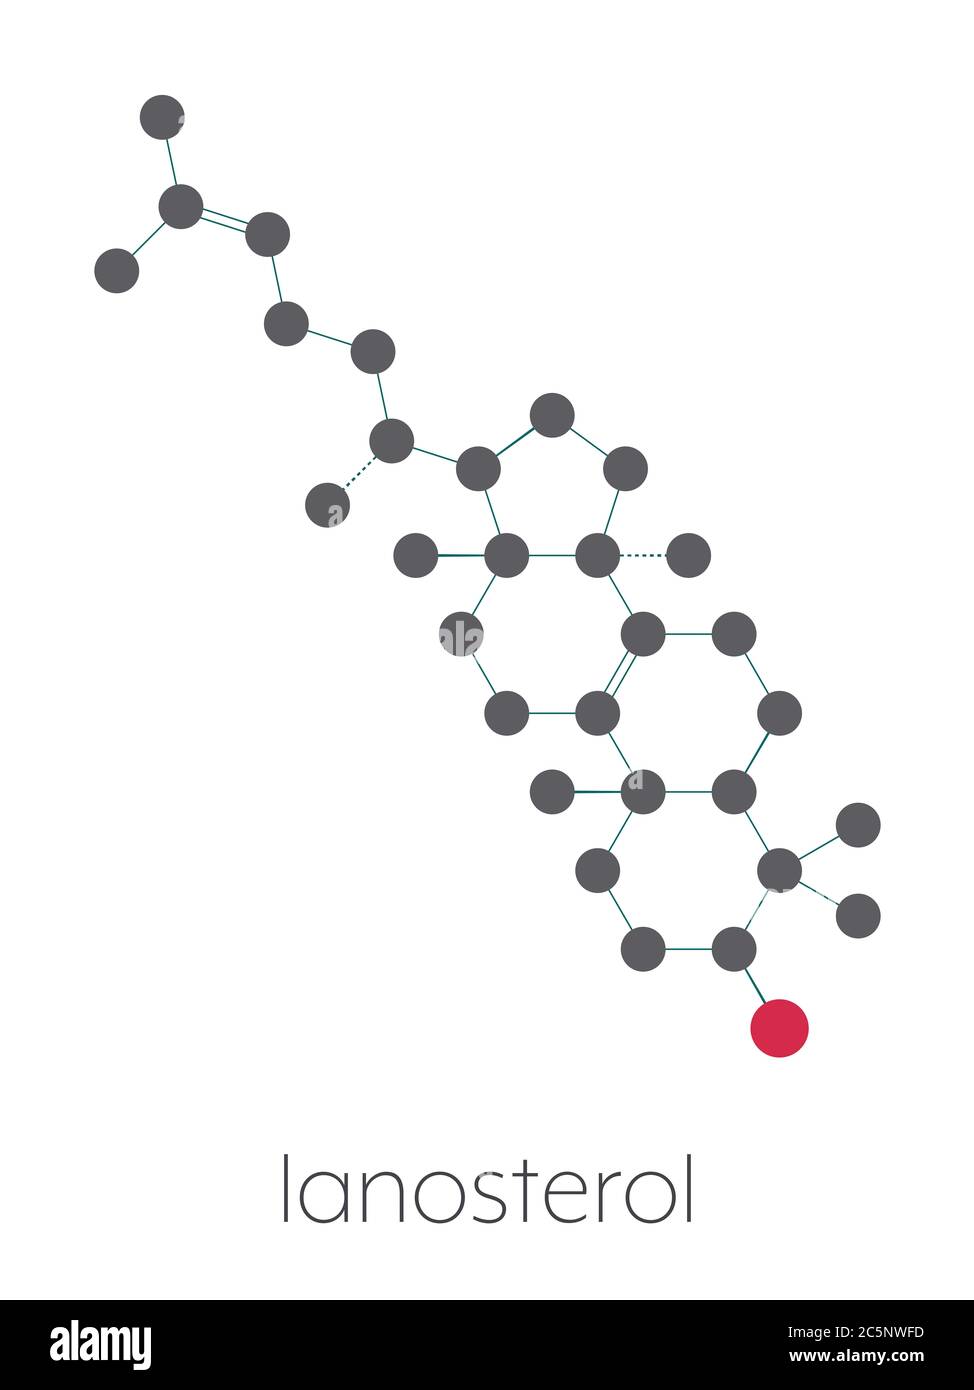 Lanosterol molecule. Investigated for treatment of cataract. Stylized skeletal formula (chemical structure): Atoms are shown as color-coded circles: hydrogen (hidden), carbon (grey), oxygen (red). Stock Photo